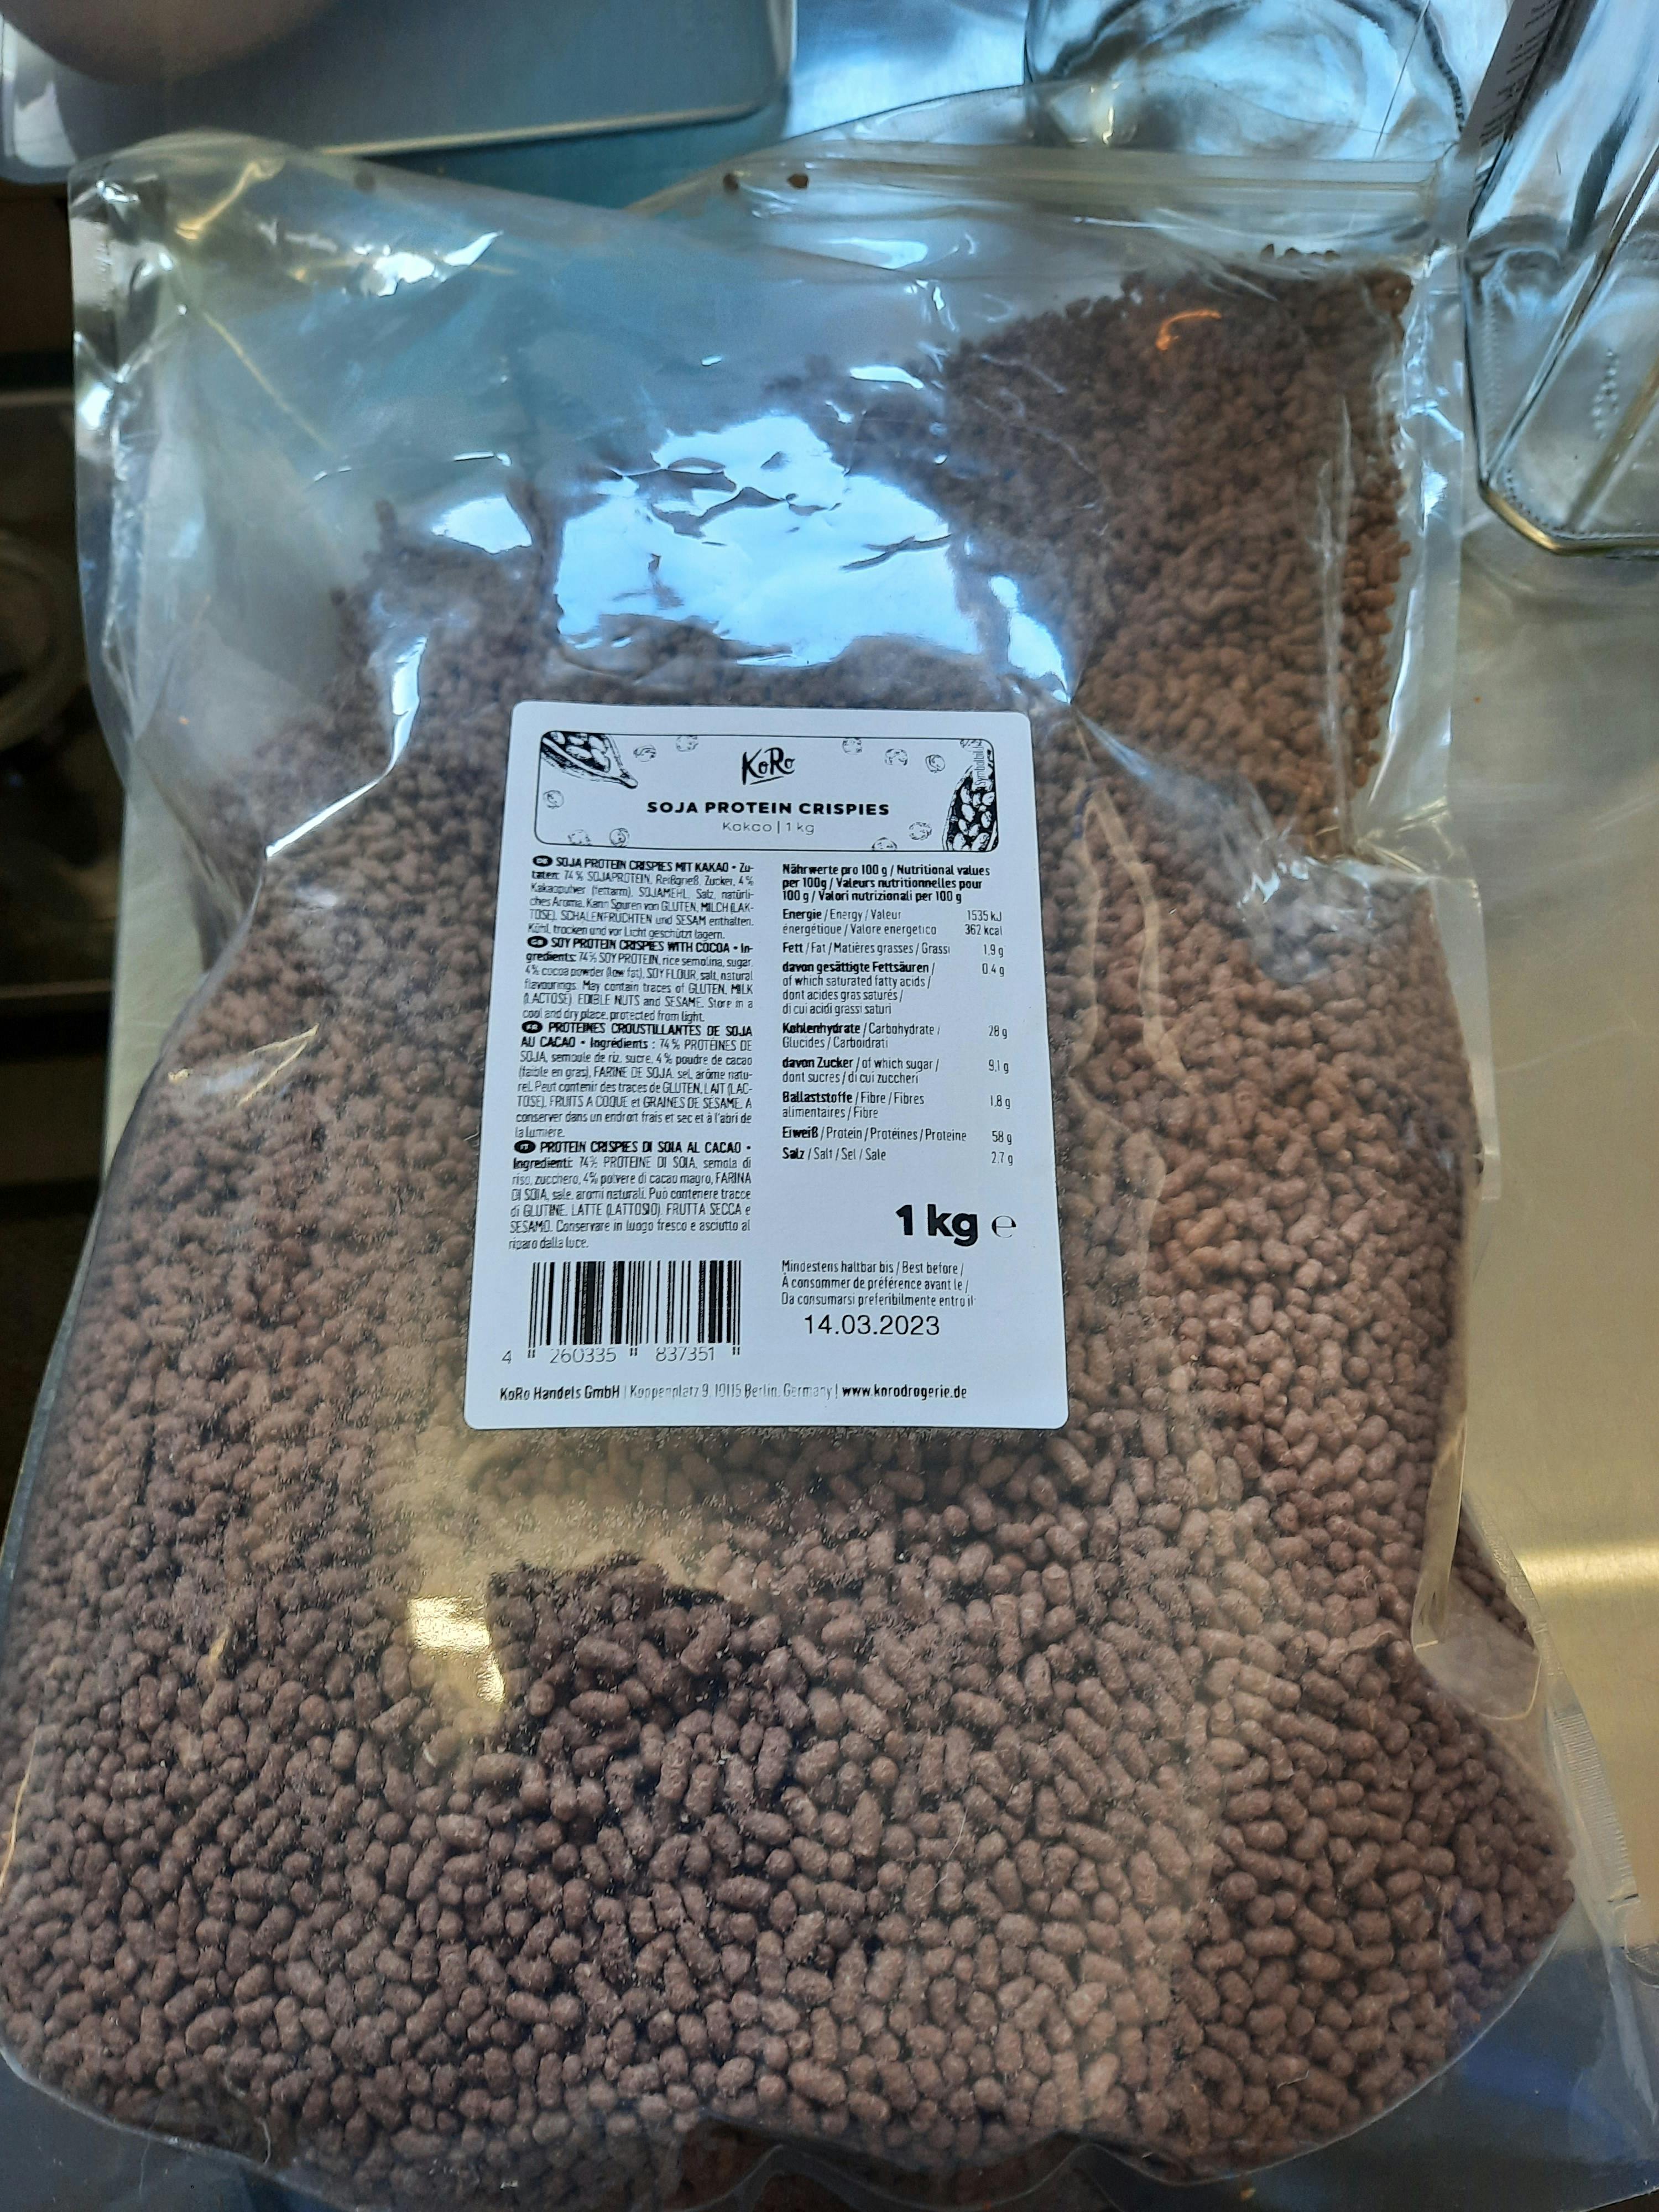 Photos and pictures of Soy products, Soja Protein Crispies Kakao